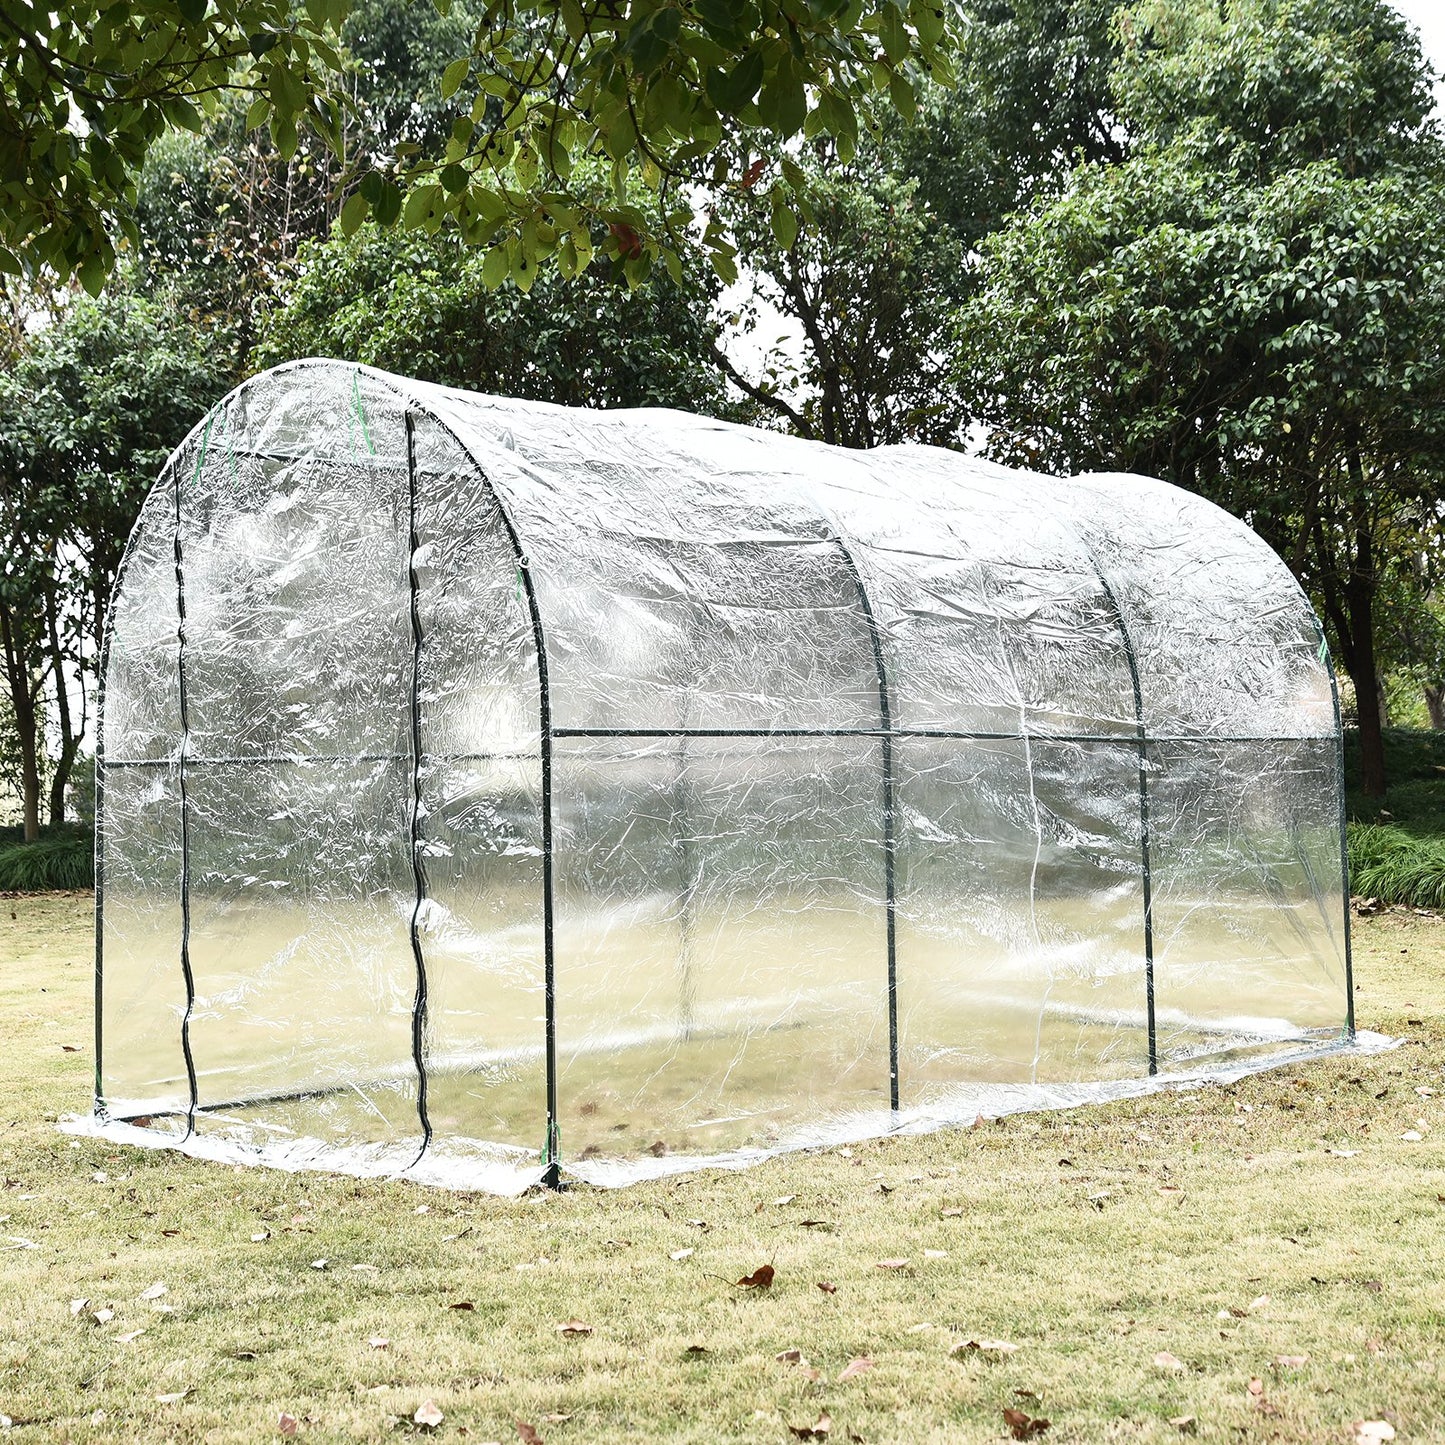 Outsunny Large Transparent PVC Tunnel Walk in Greenhouse Steel Frame Plant Vegetable Flower Grow House